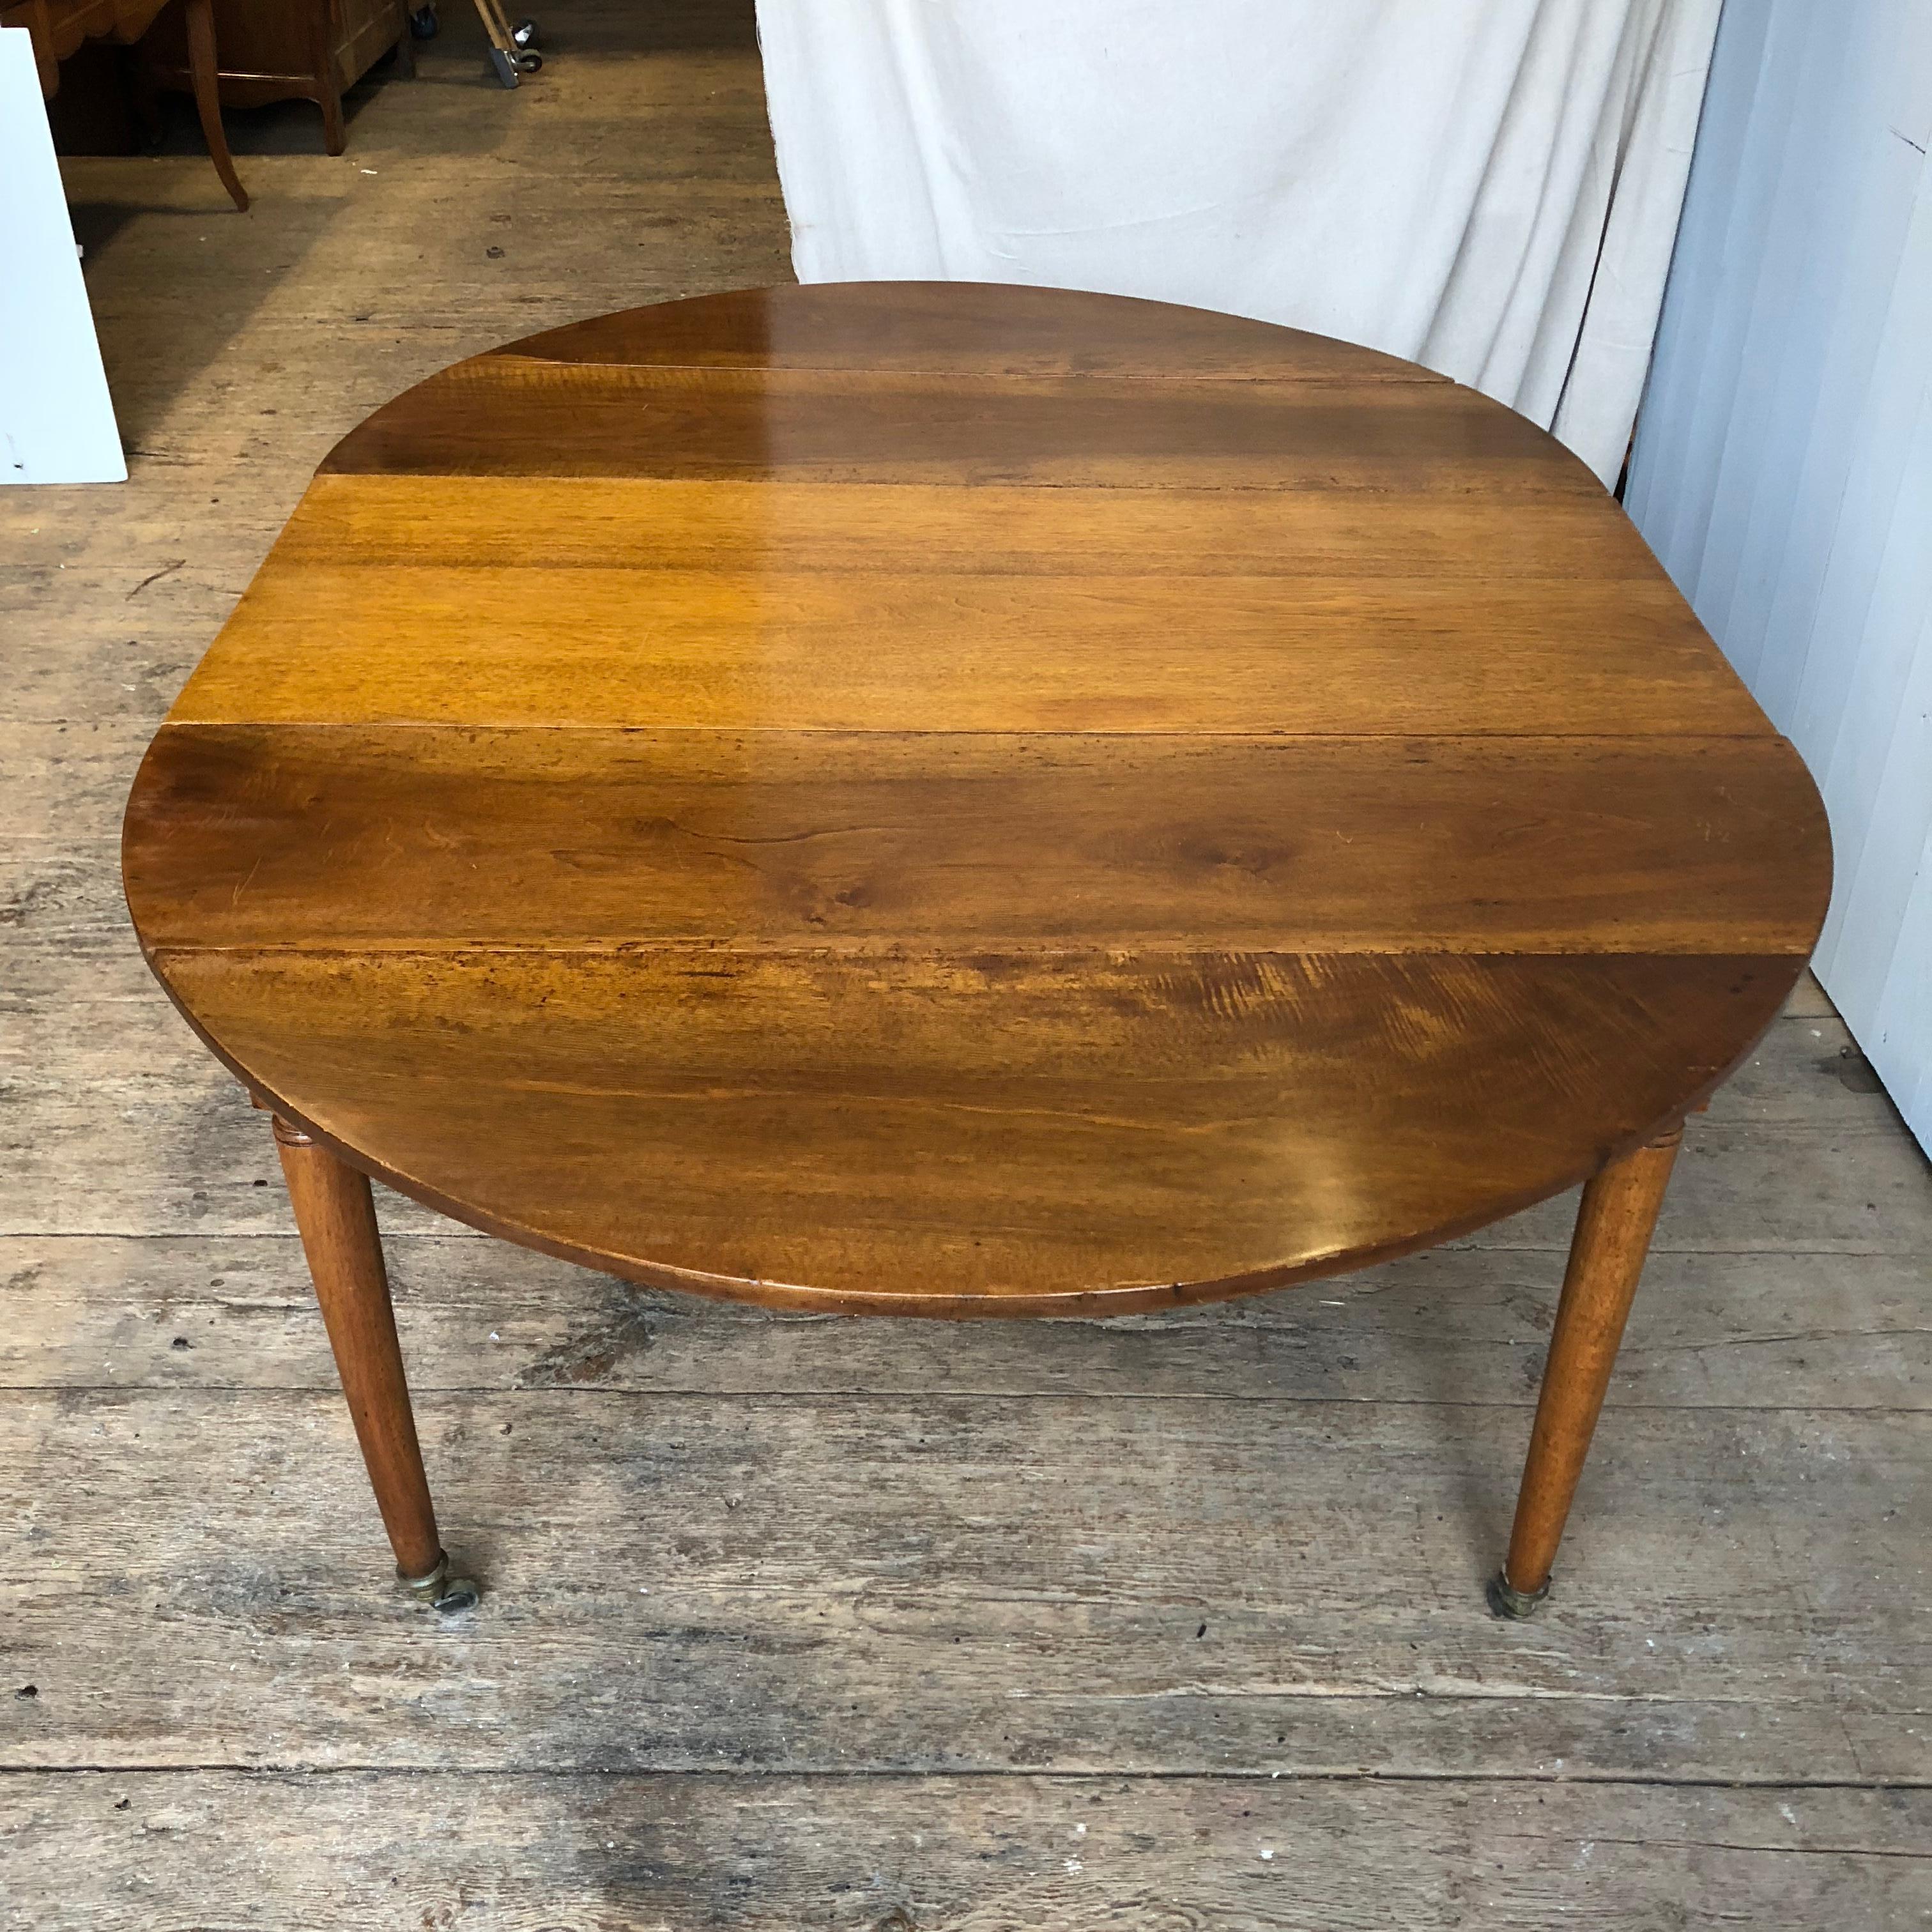 19th Century Directoire Period Drop Leaf Dining Table, circa 1800